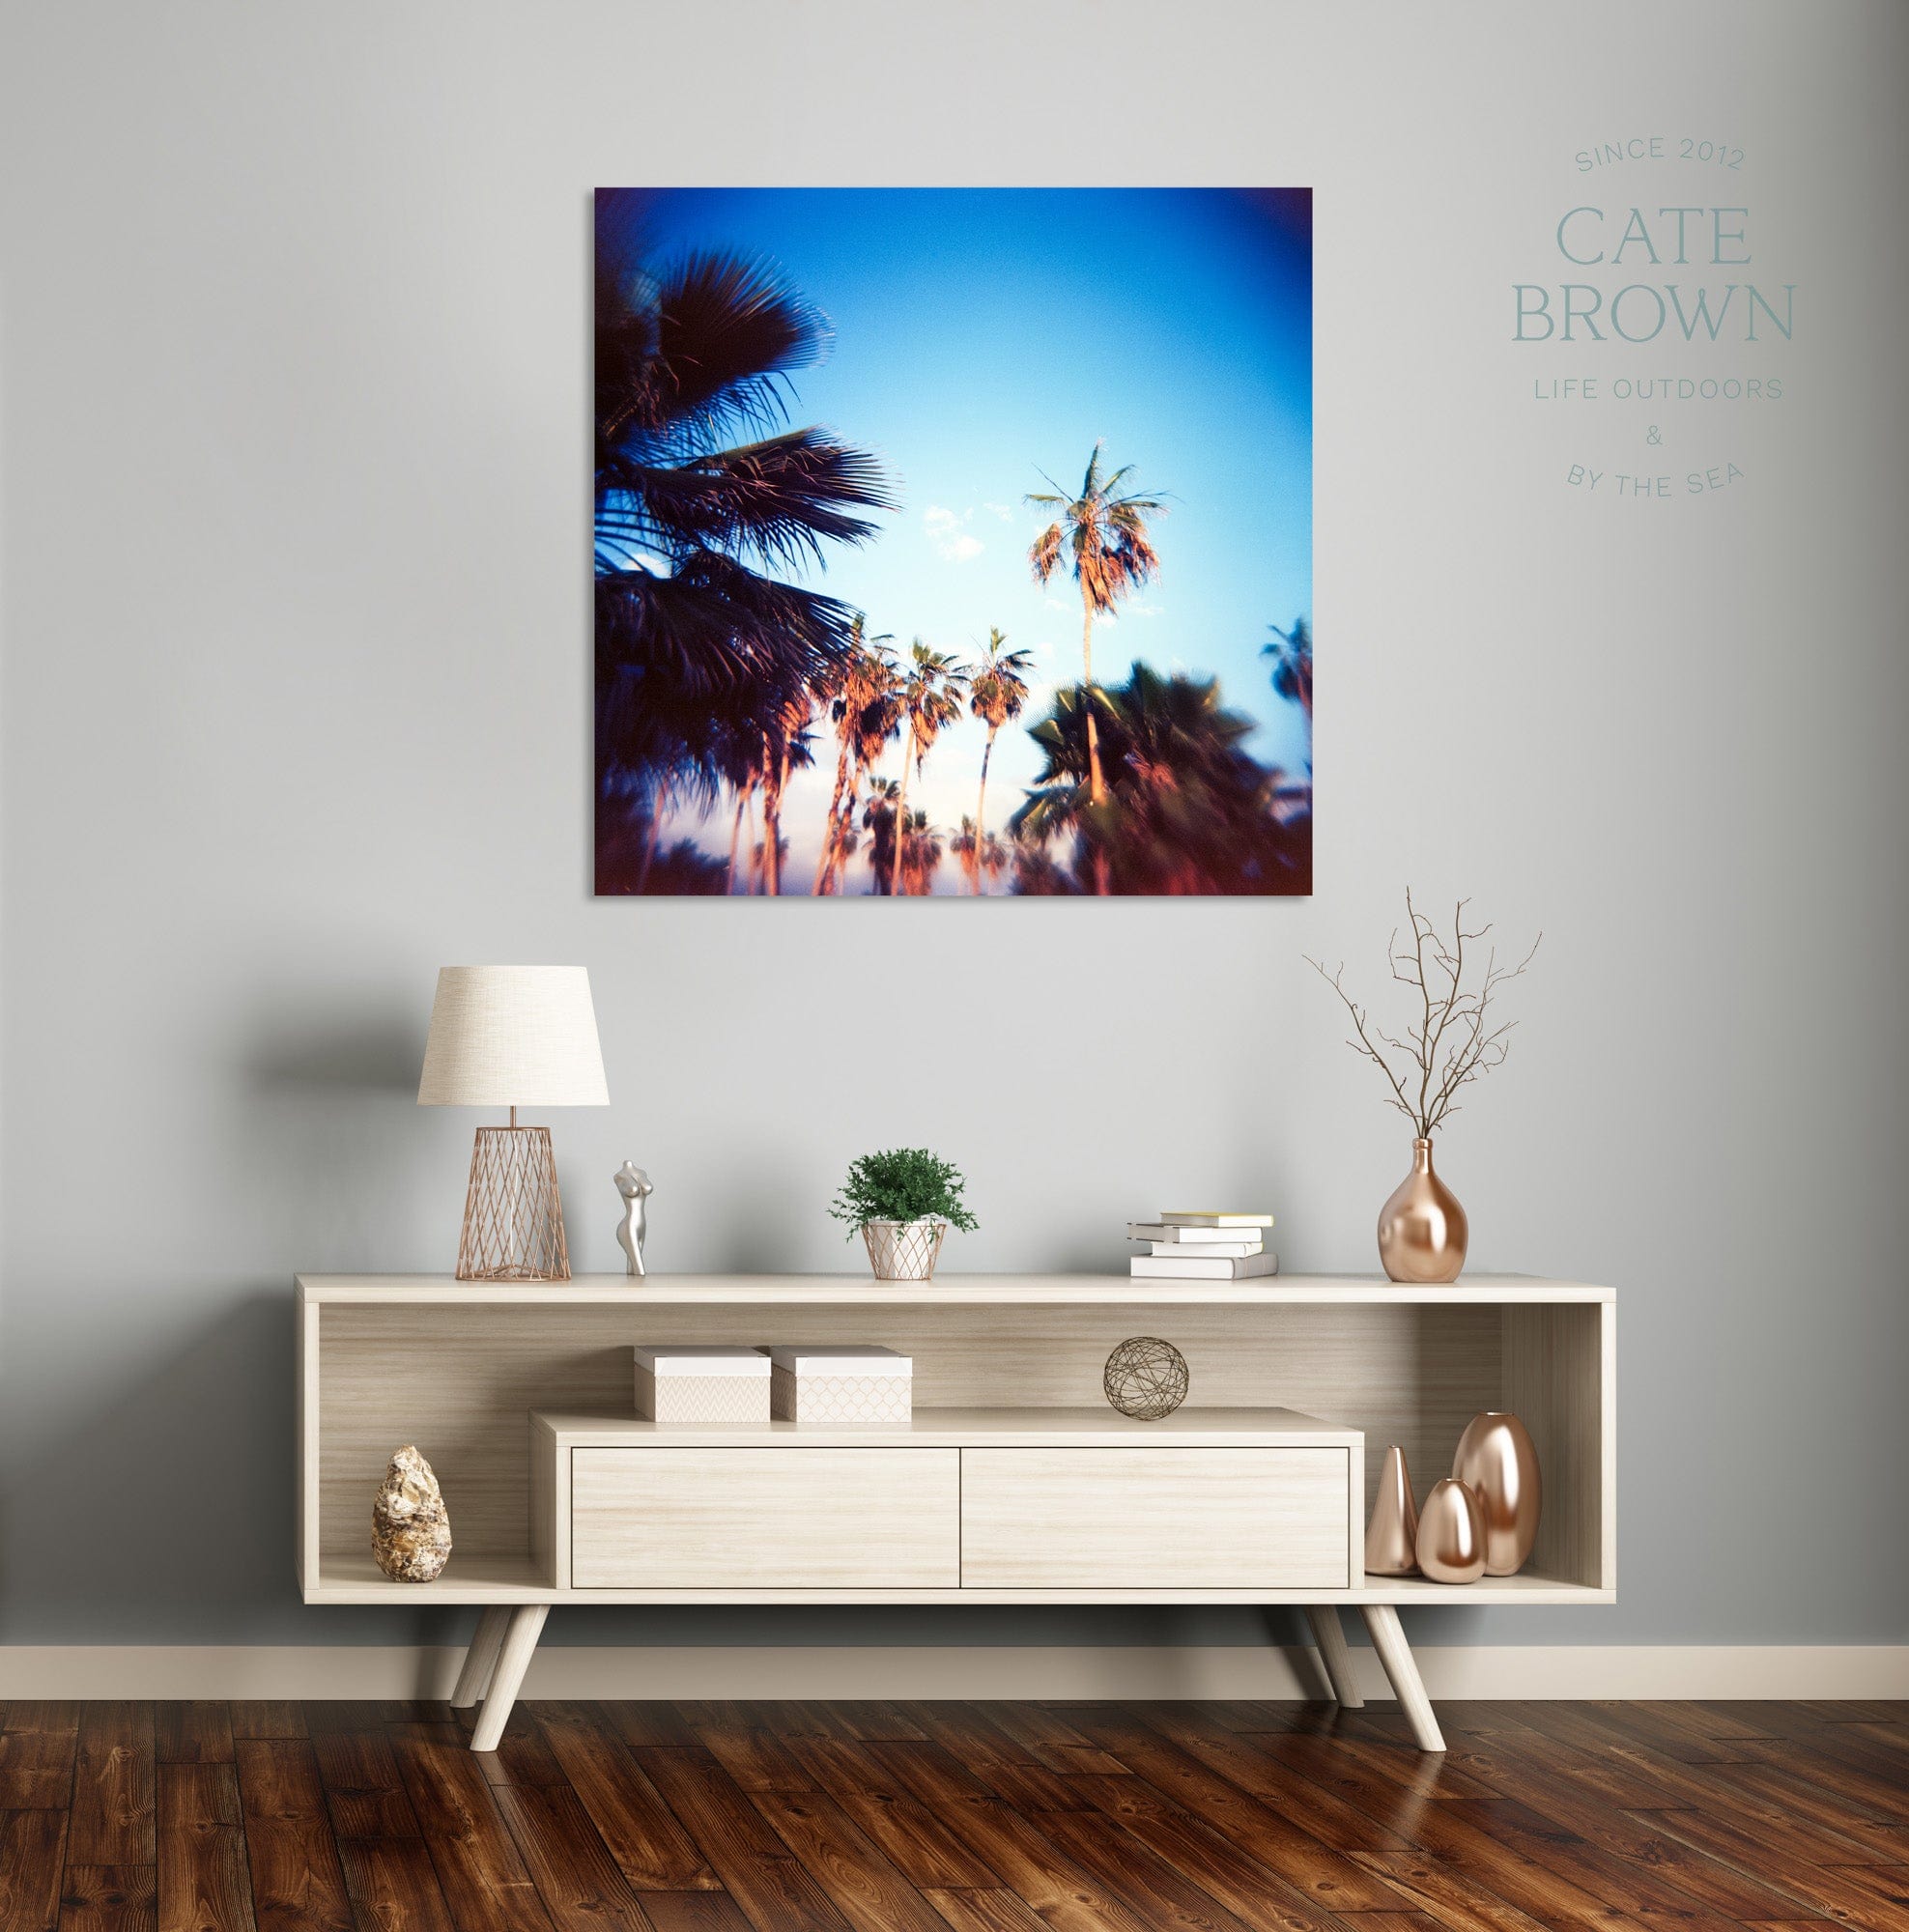 Cate Brown Photo Canvas / 16"x16" / None (Print Only) Baja Palms #1  //  Film Photography Made to Order Ocean Fine Art